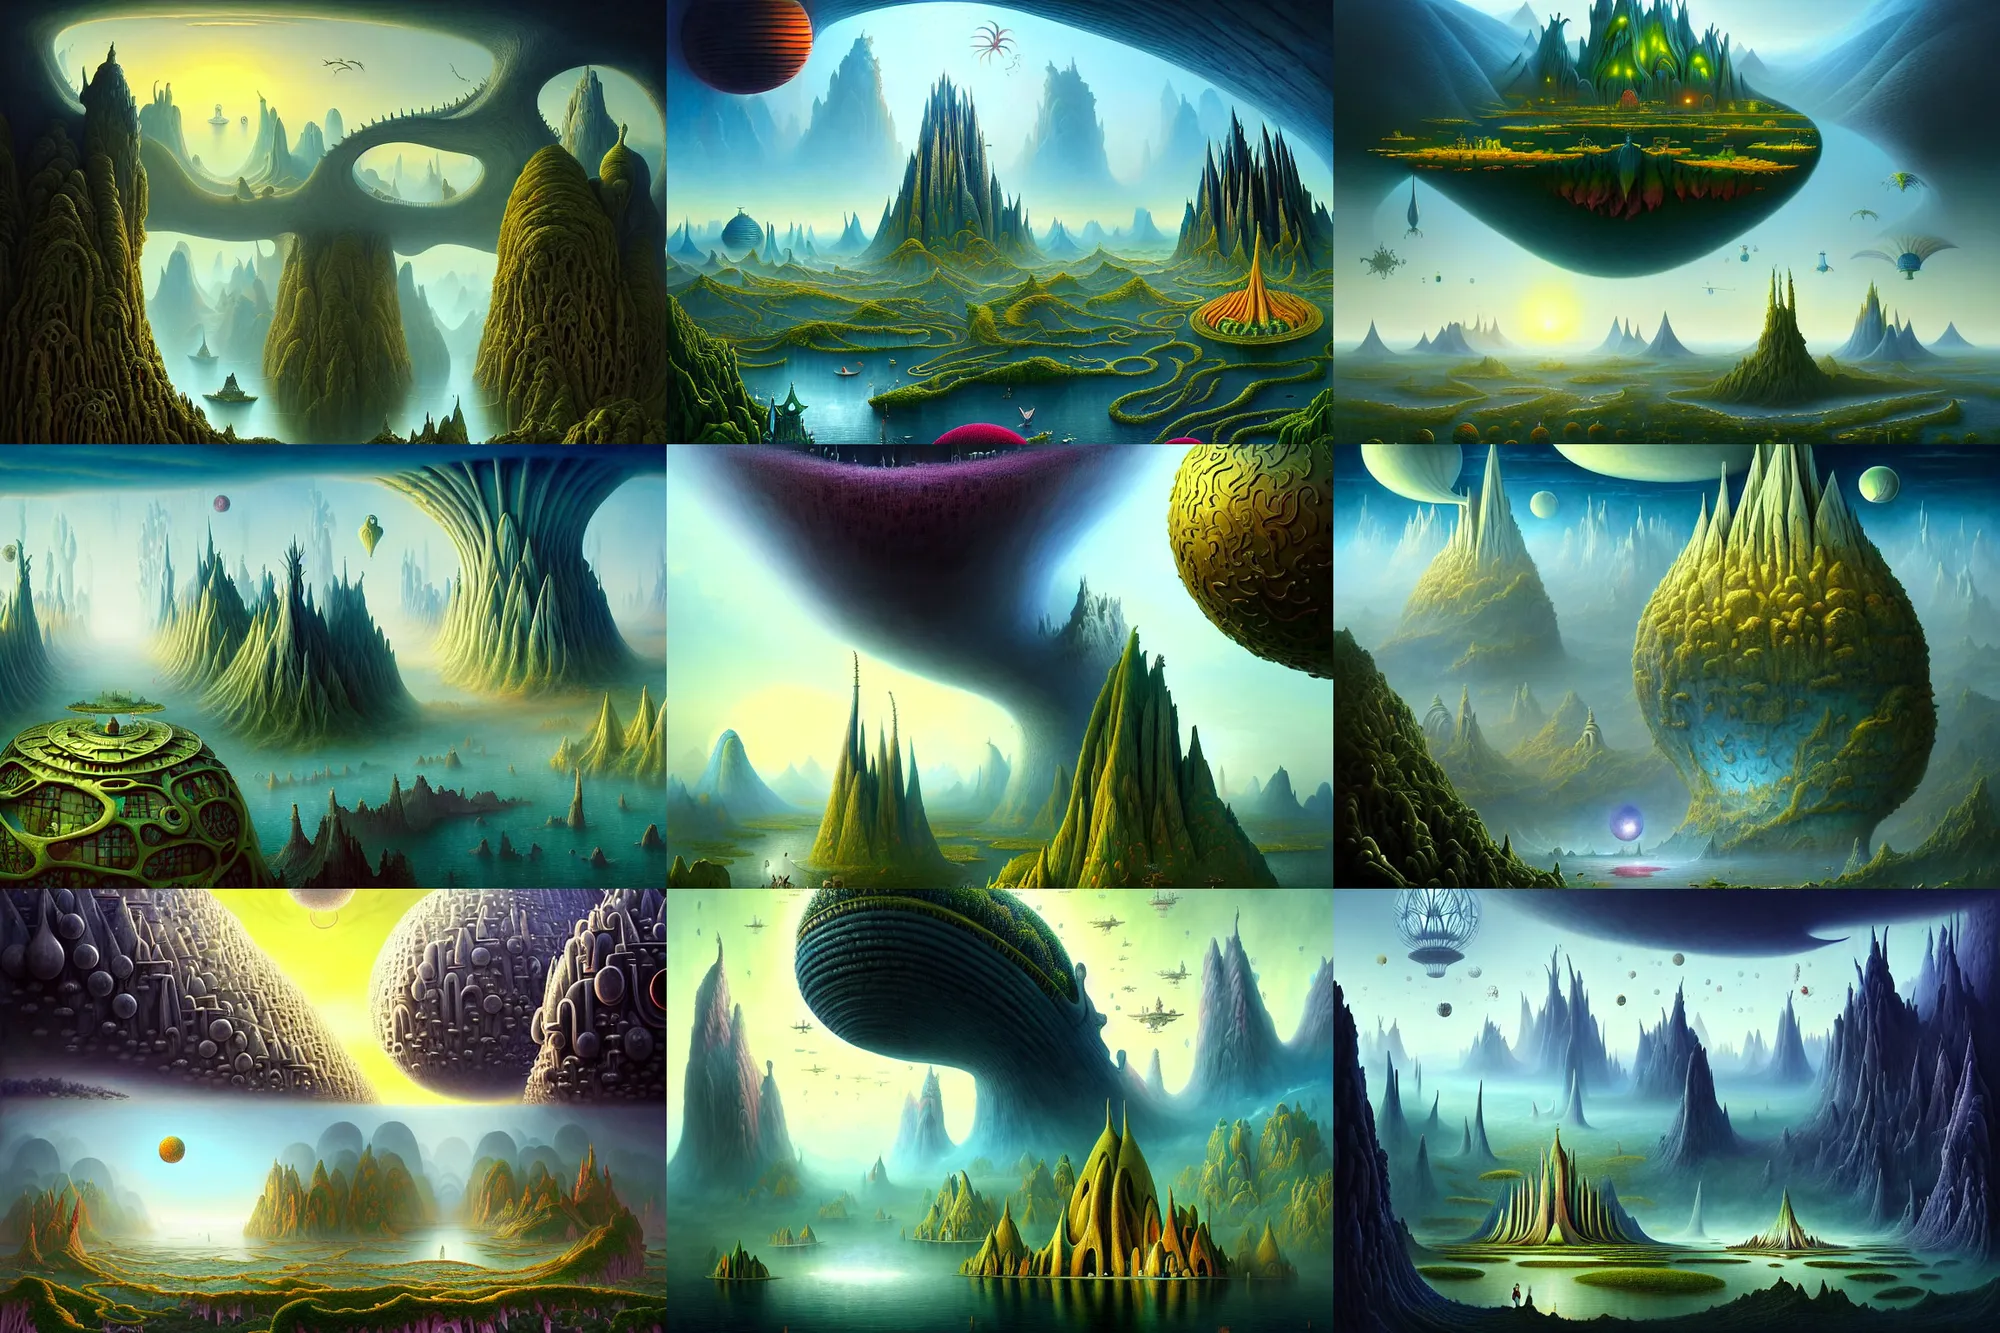 Prompt: a beguiling epic stunning beautiful and insanely detailed matte painting of alien dream worlds with surreal architecture designed by Heironymous Bosch, mega structures inspired by Heironymous Bosch's Garden of Earthly Delights, vast surreal landscape and horizon by Asher Durand and Andrew Ferez and Cyril Rolando and Oh Ji Hoon and Tyler Edlin, masterpiece!!!, grand!, imaginative!!!, whimsical!!, epic scale, intricate details, sense of awe, elite, wonder, insanely complex, masterful composition!!!, sharp focus, fantasy realism, dramatic lighting